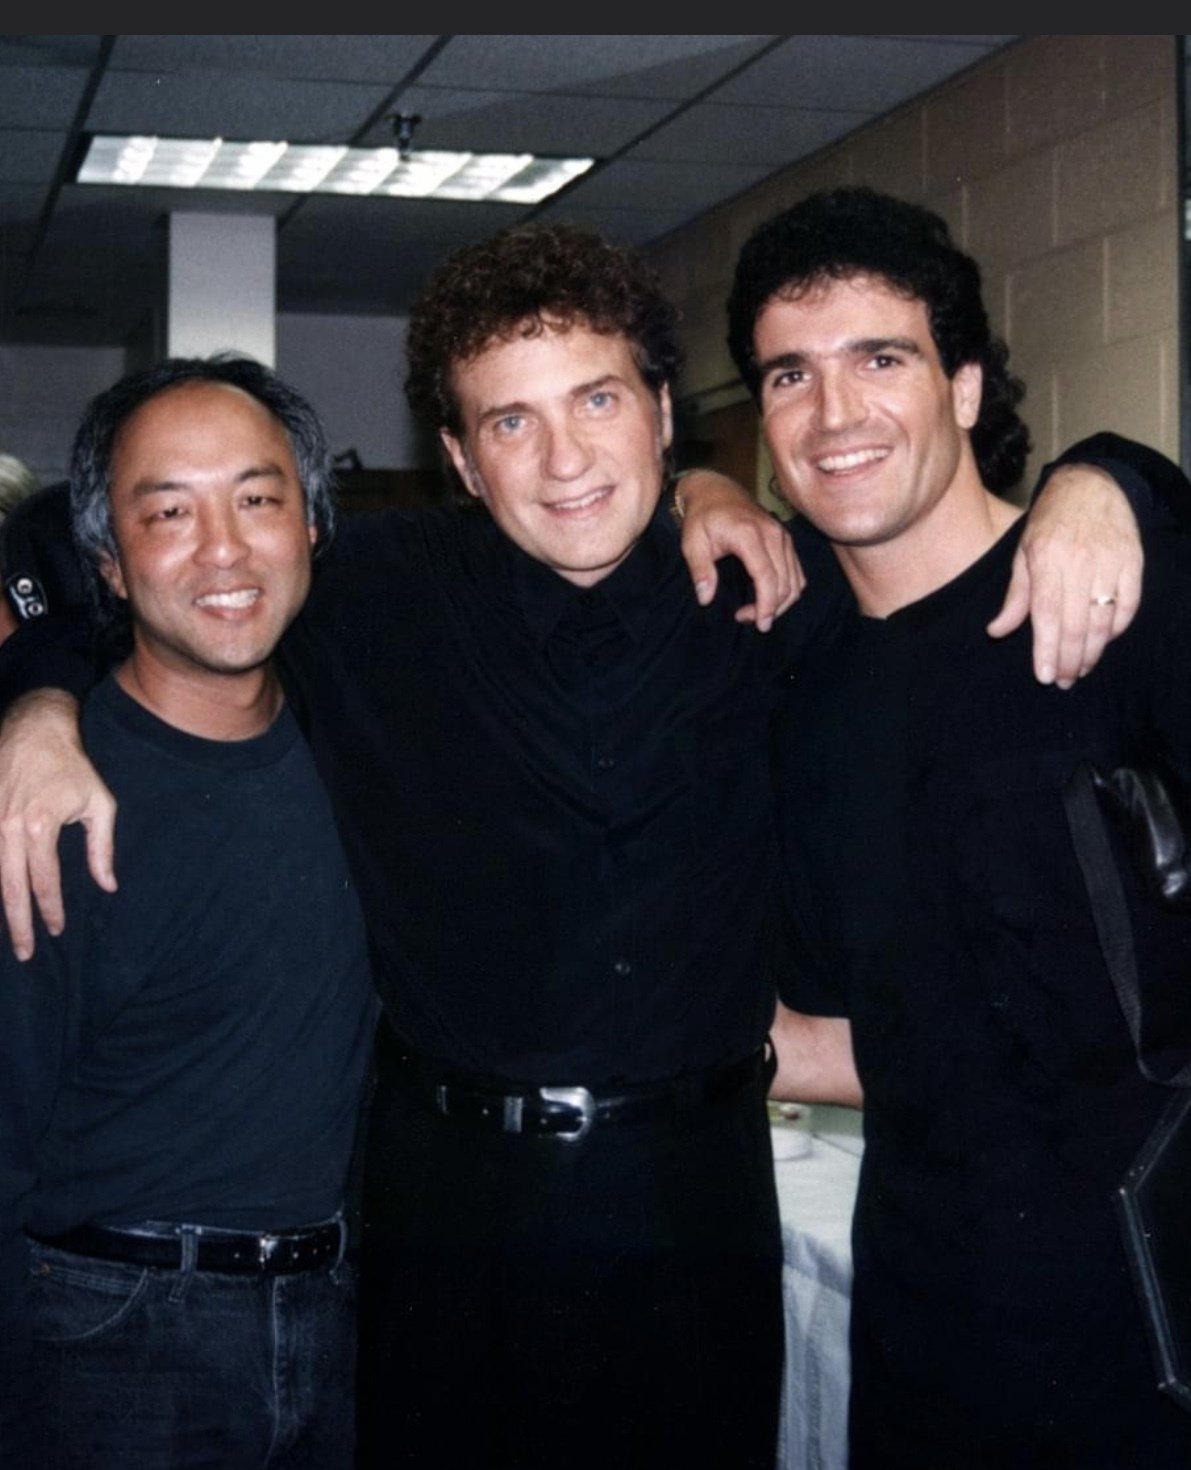 With singer Dennis DeYoung and guitarist Brian Nakagawa before our show in DC